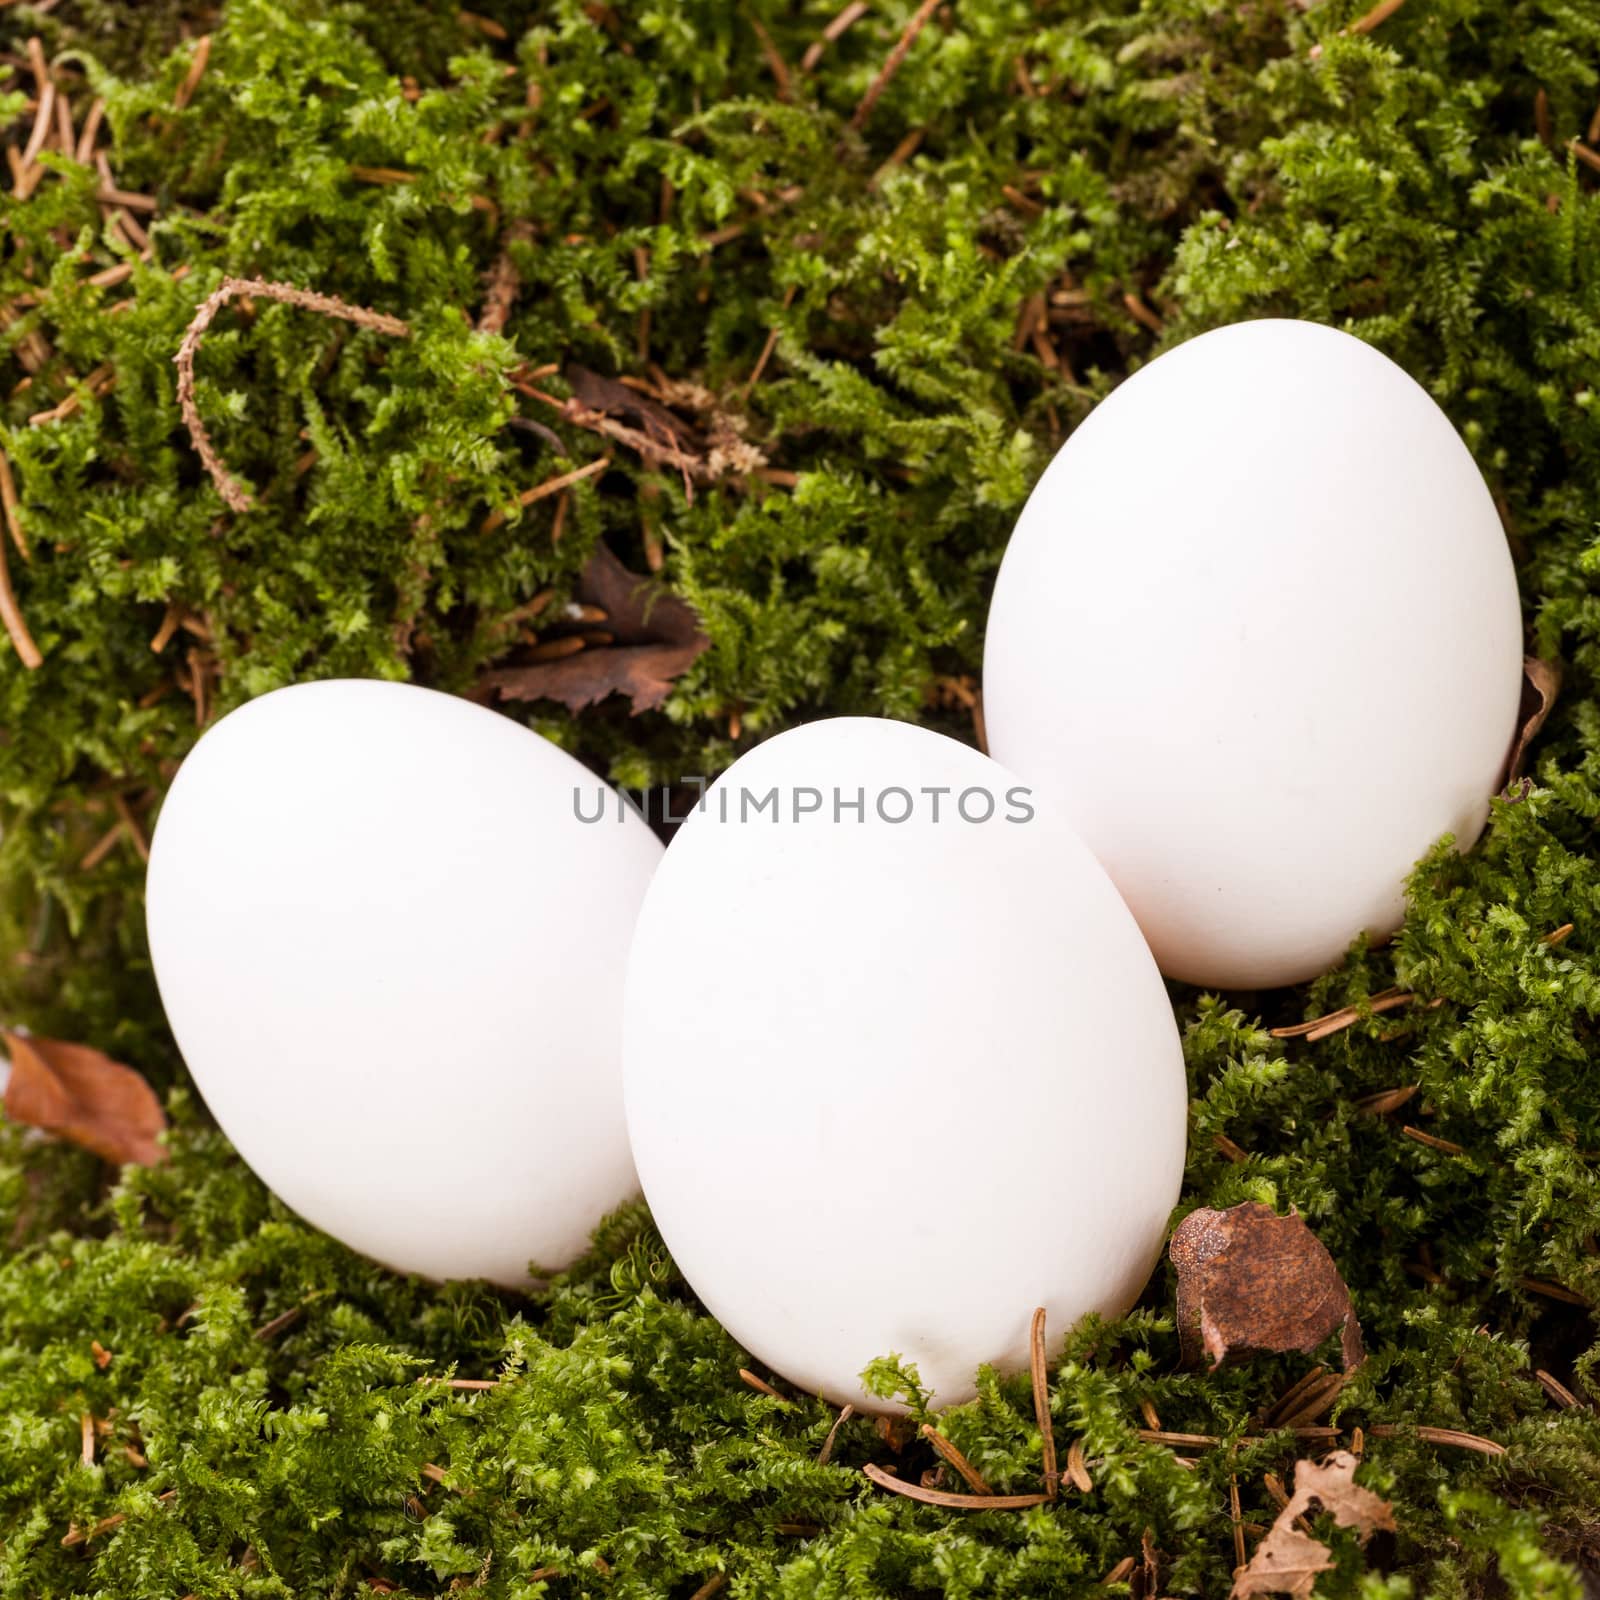 Three plain white undecorated Easter eggs nestling in a straw nest with a delicate dainty spray of Babys Breath flowers to celebrate springtime and the Easter holiday